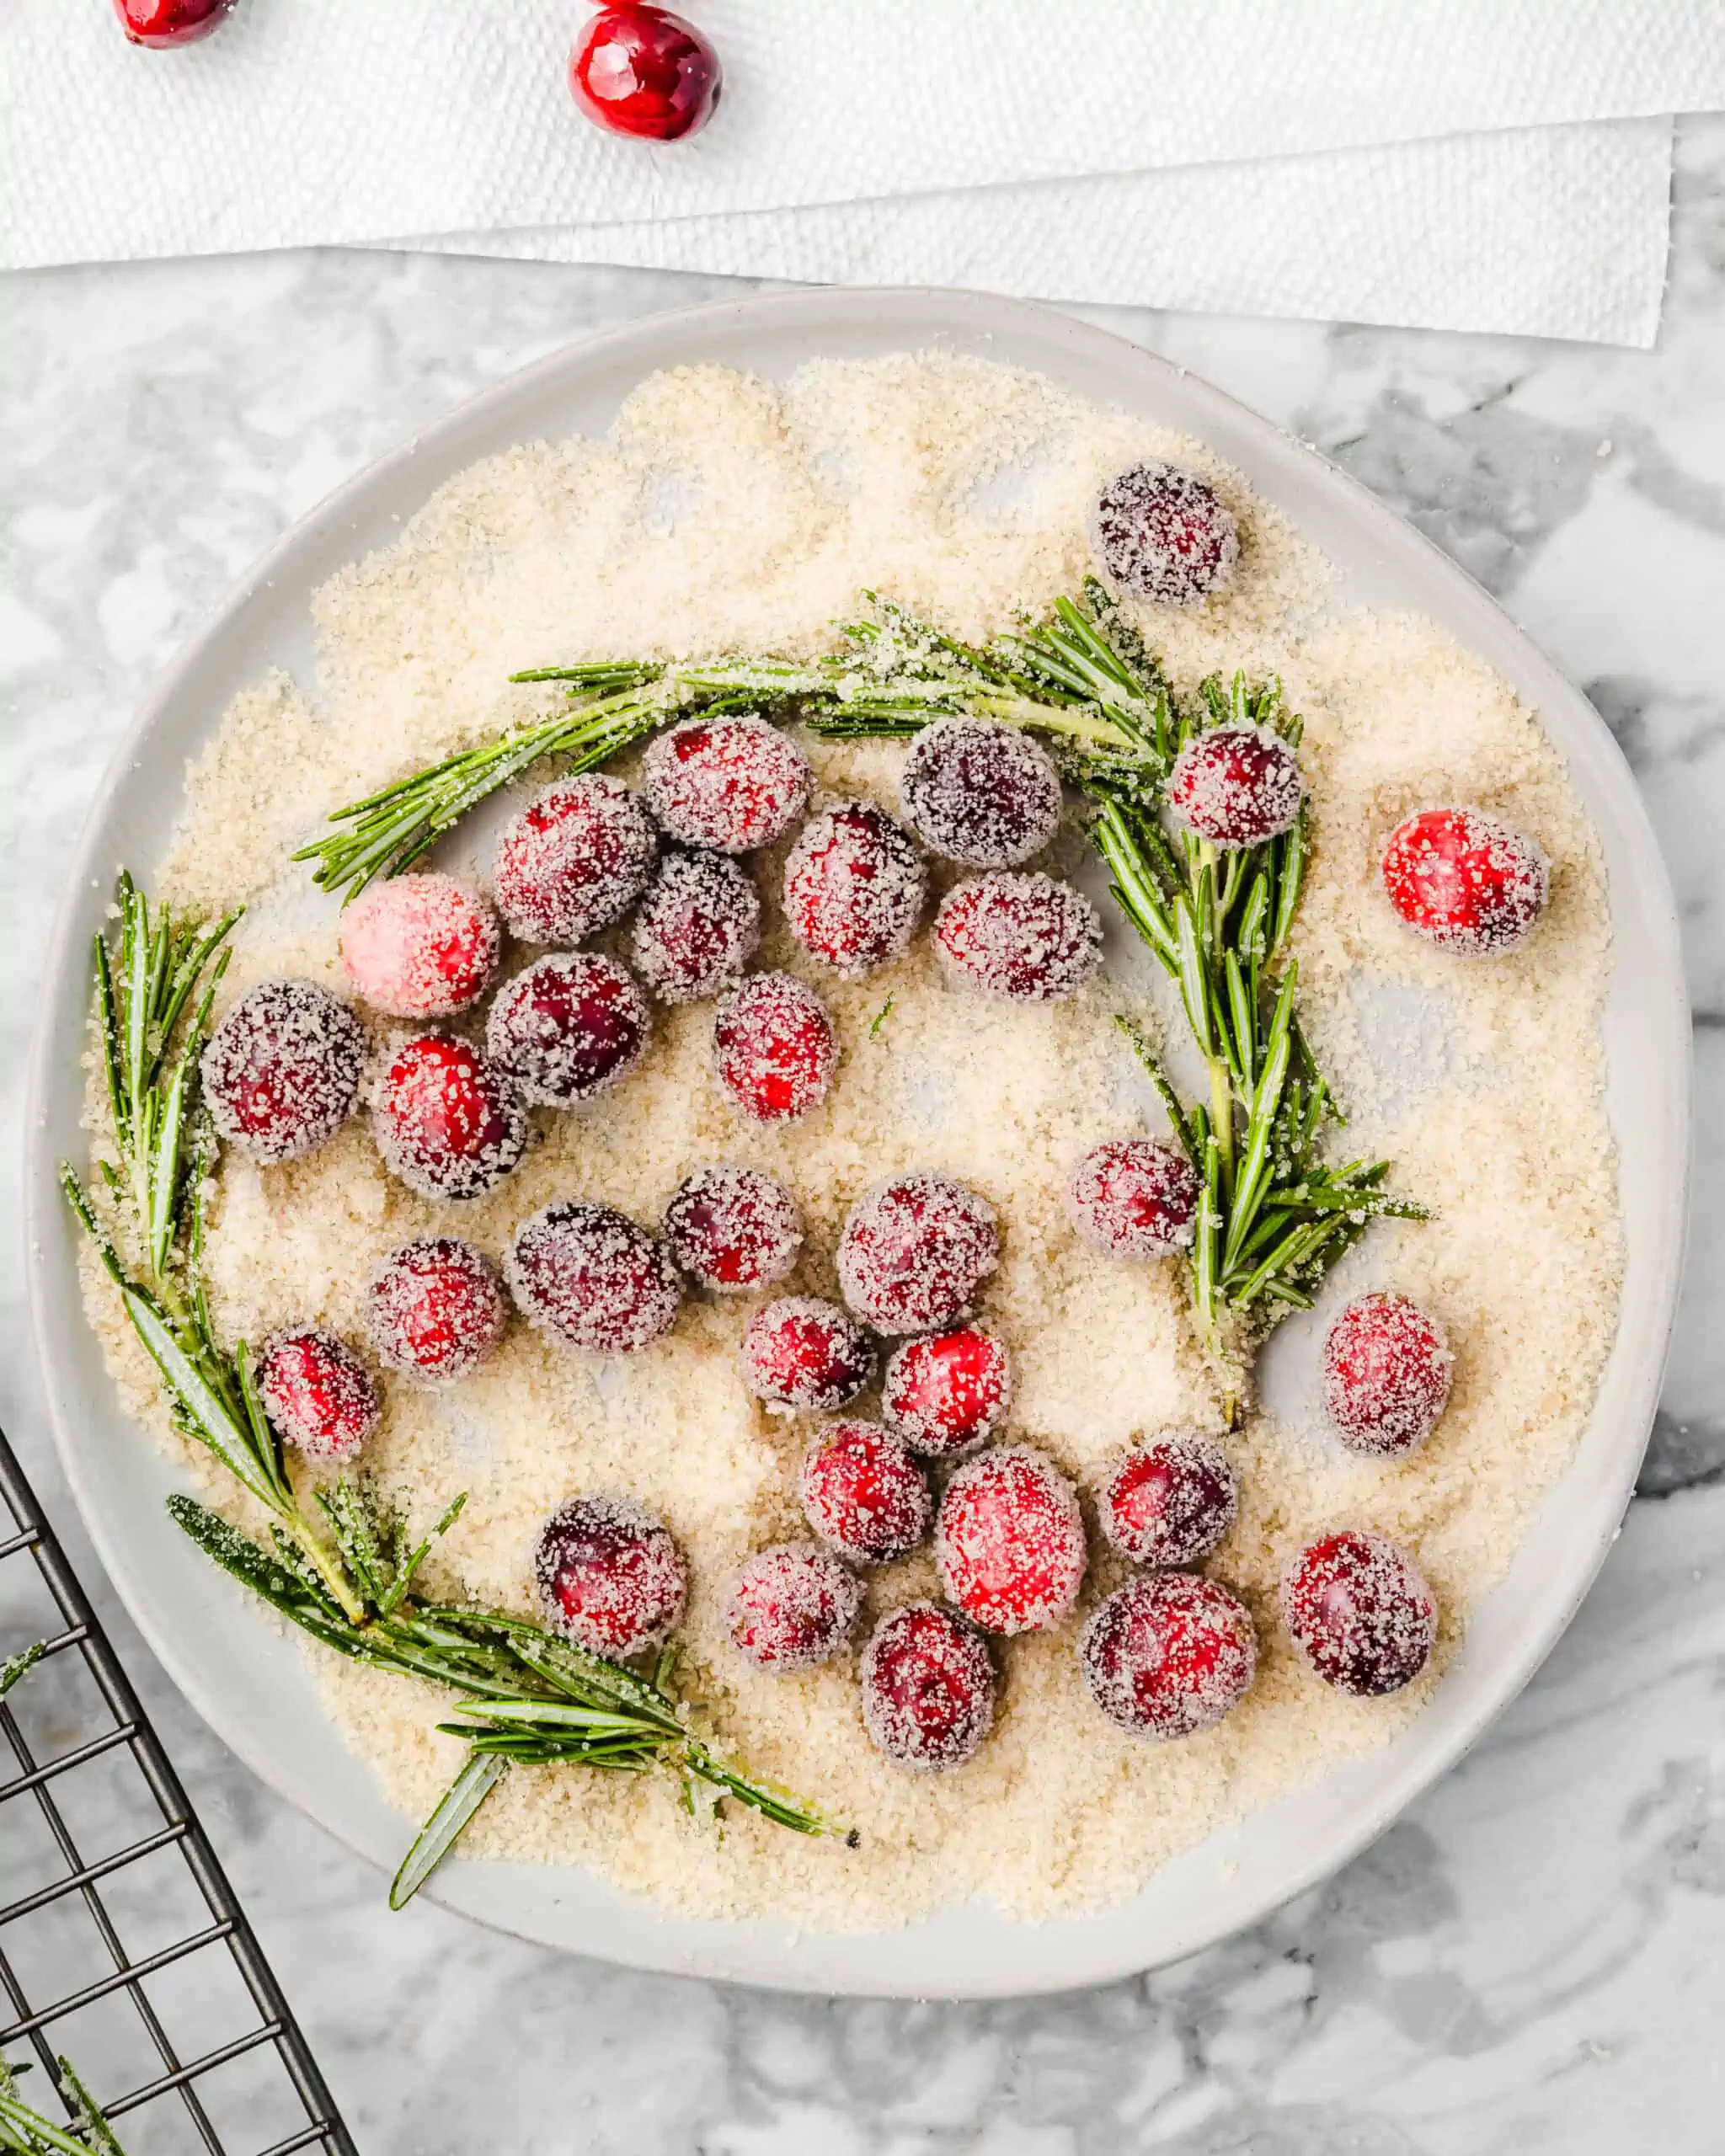 sugared rosemary and cranberries on a plate.